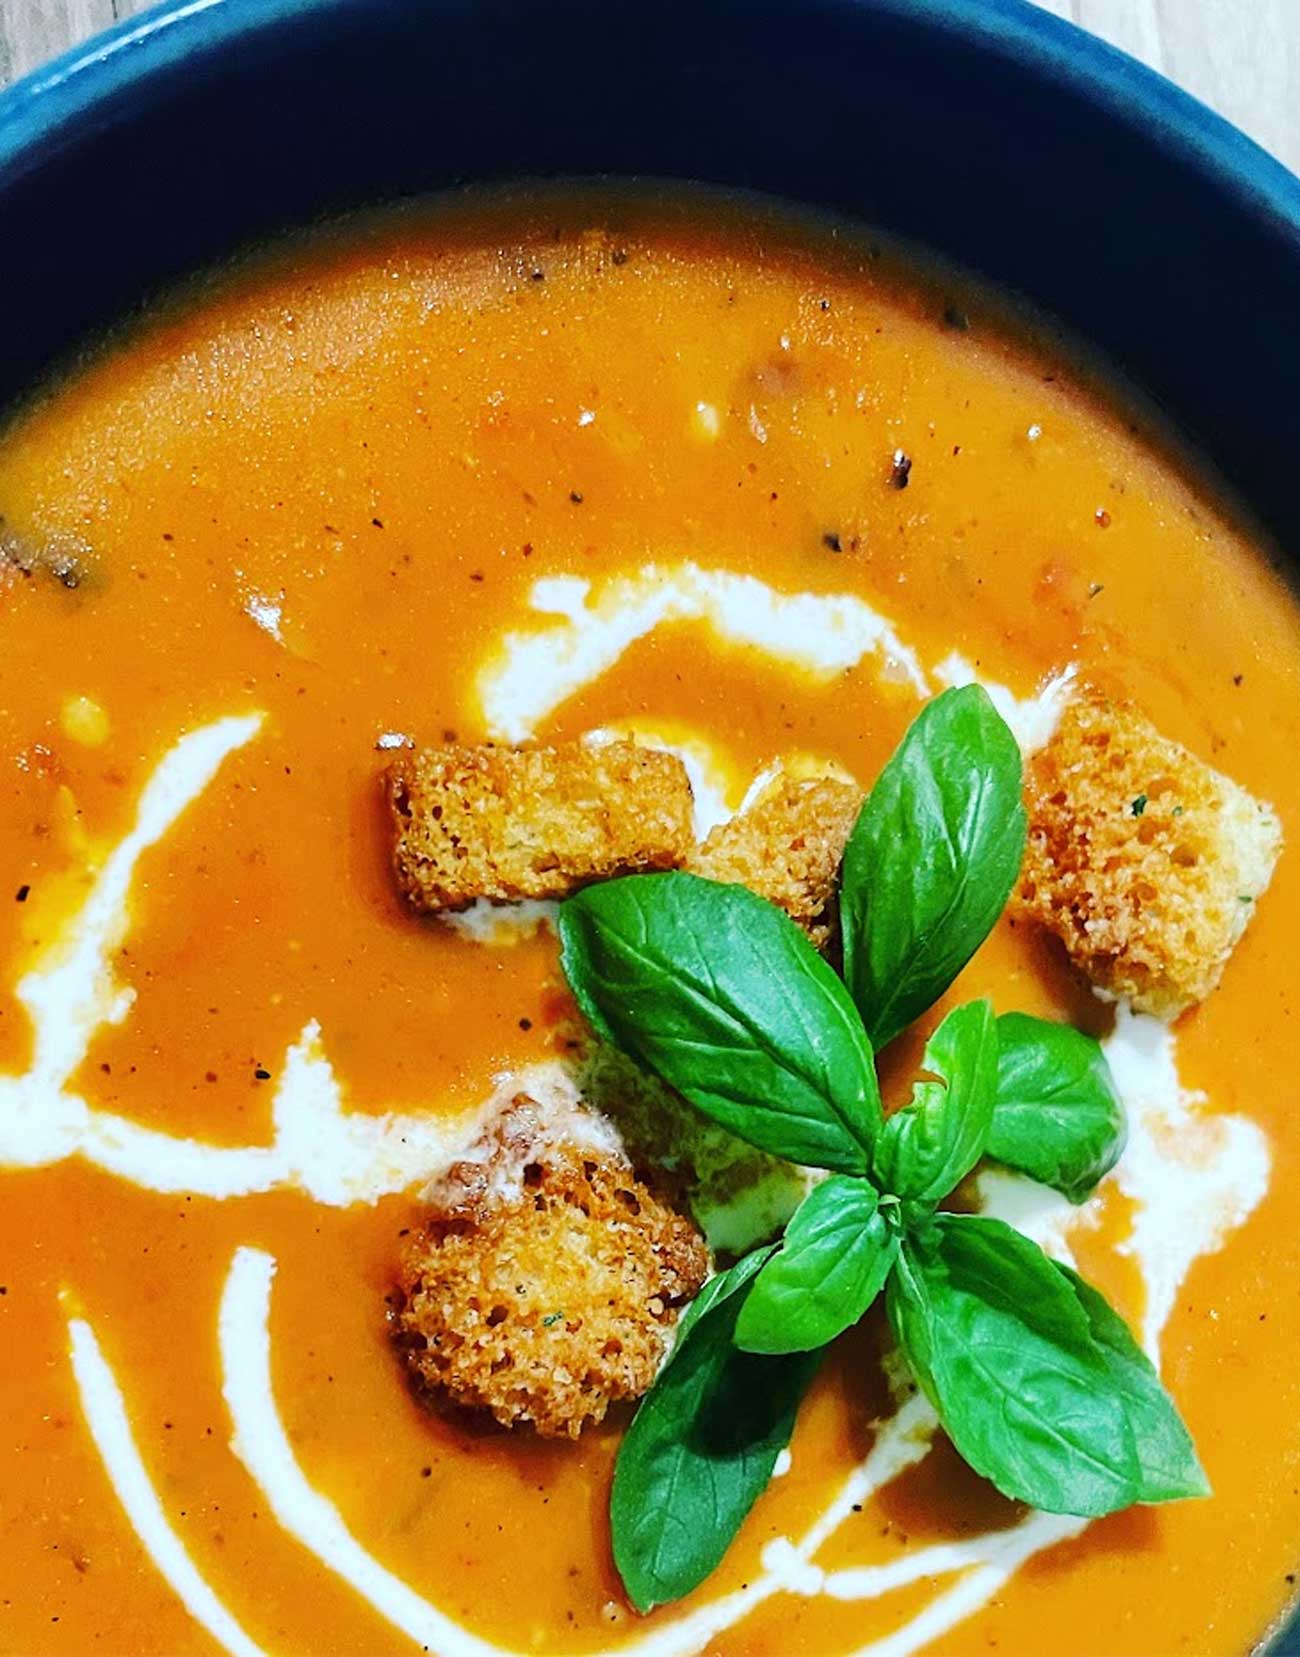 World's Best: The Ultimate Fire-Roasted Tomato Bisque